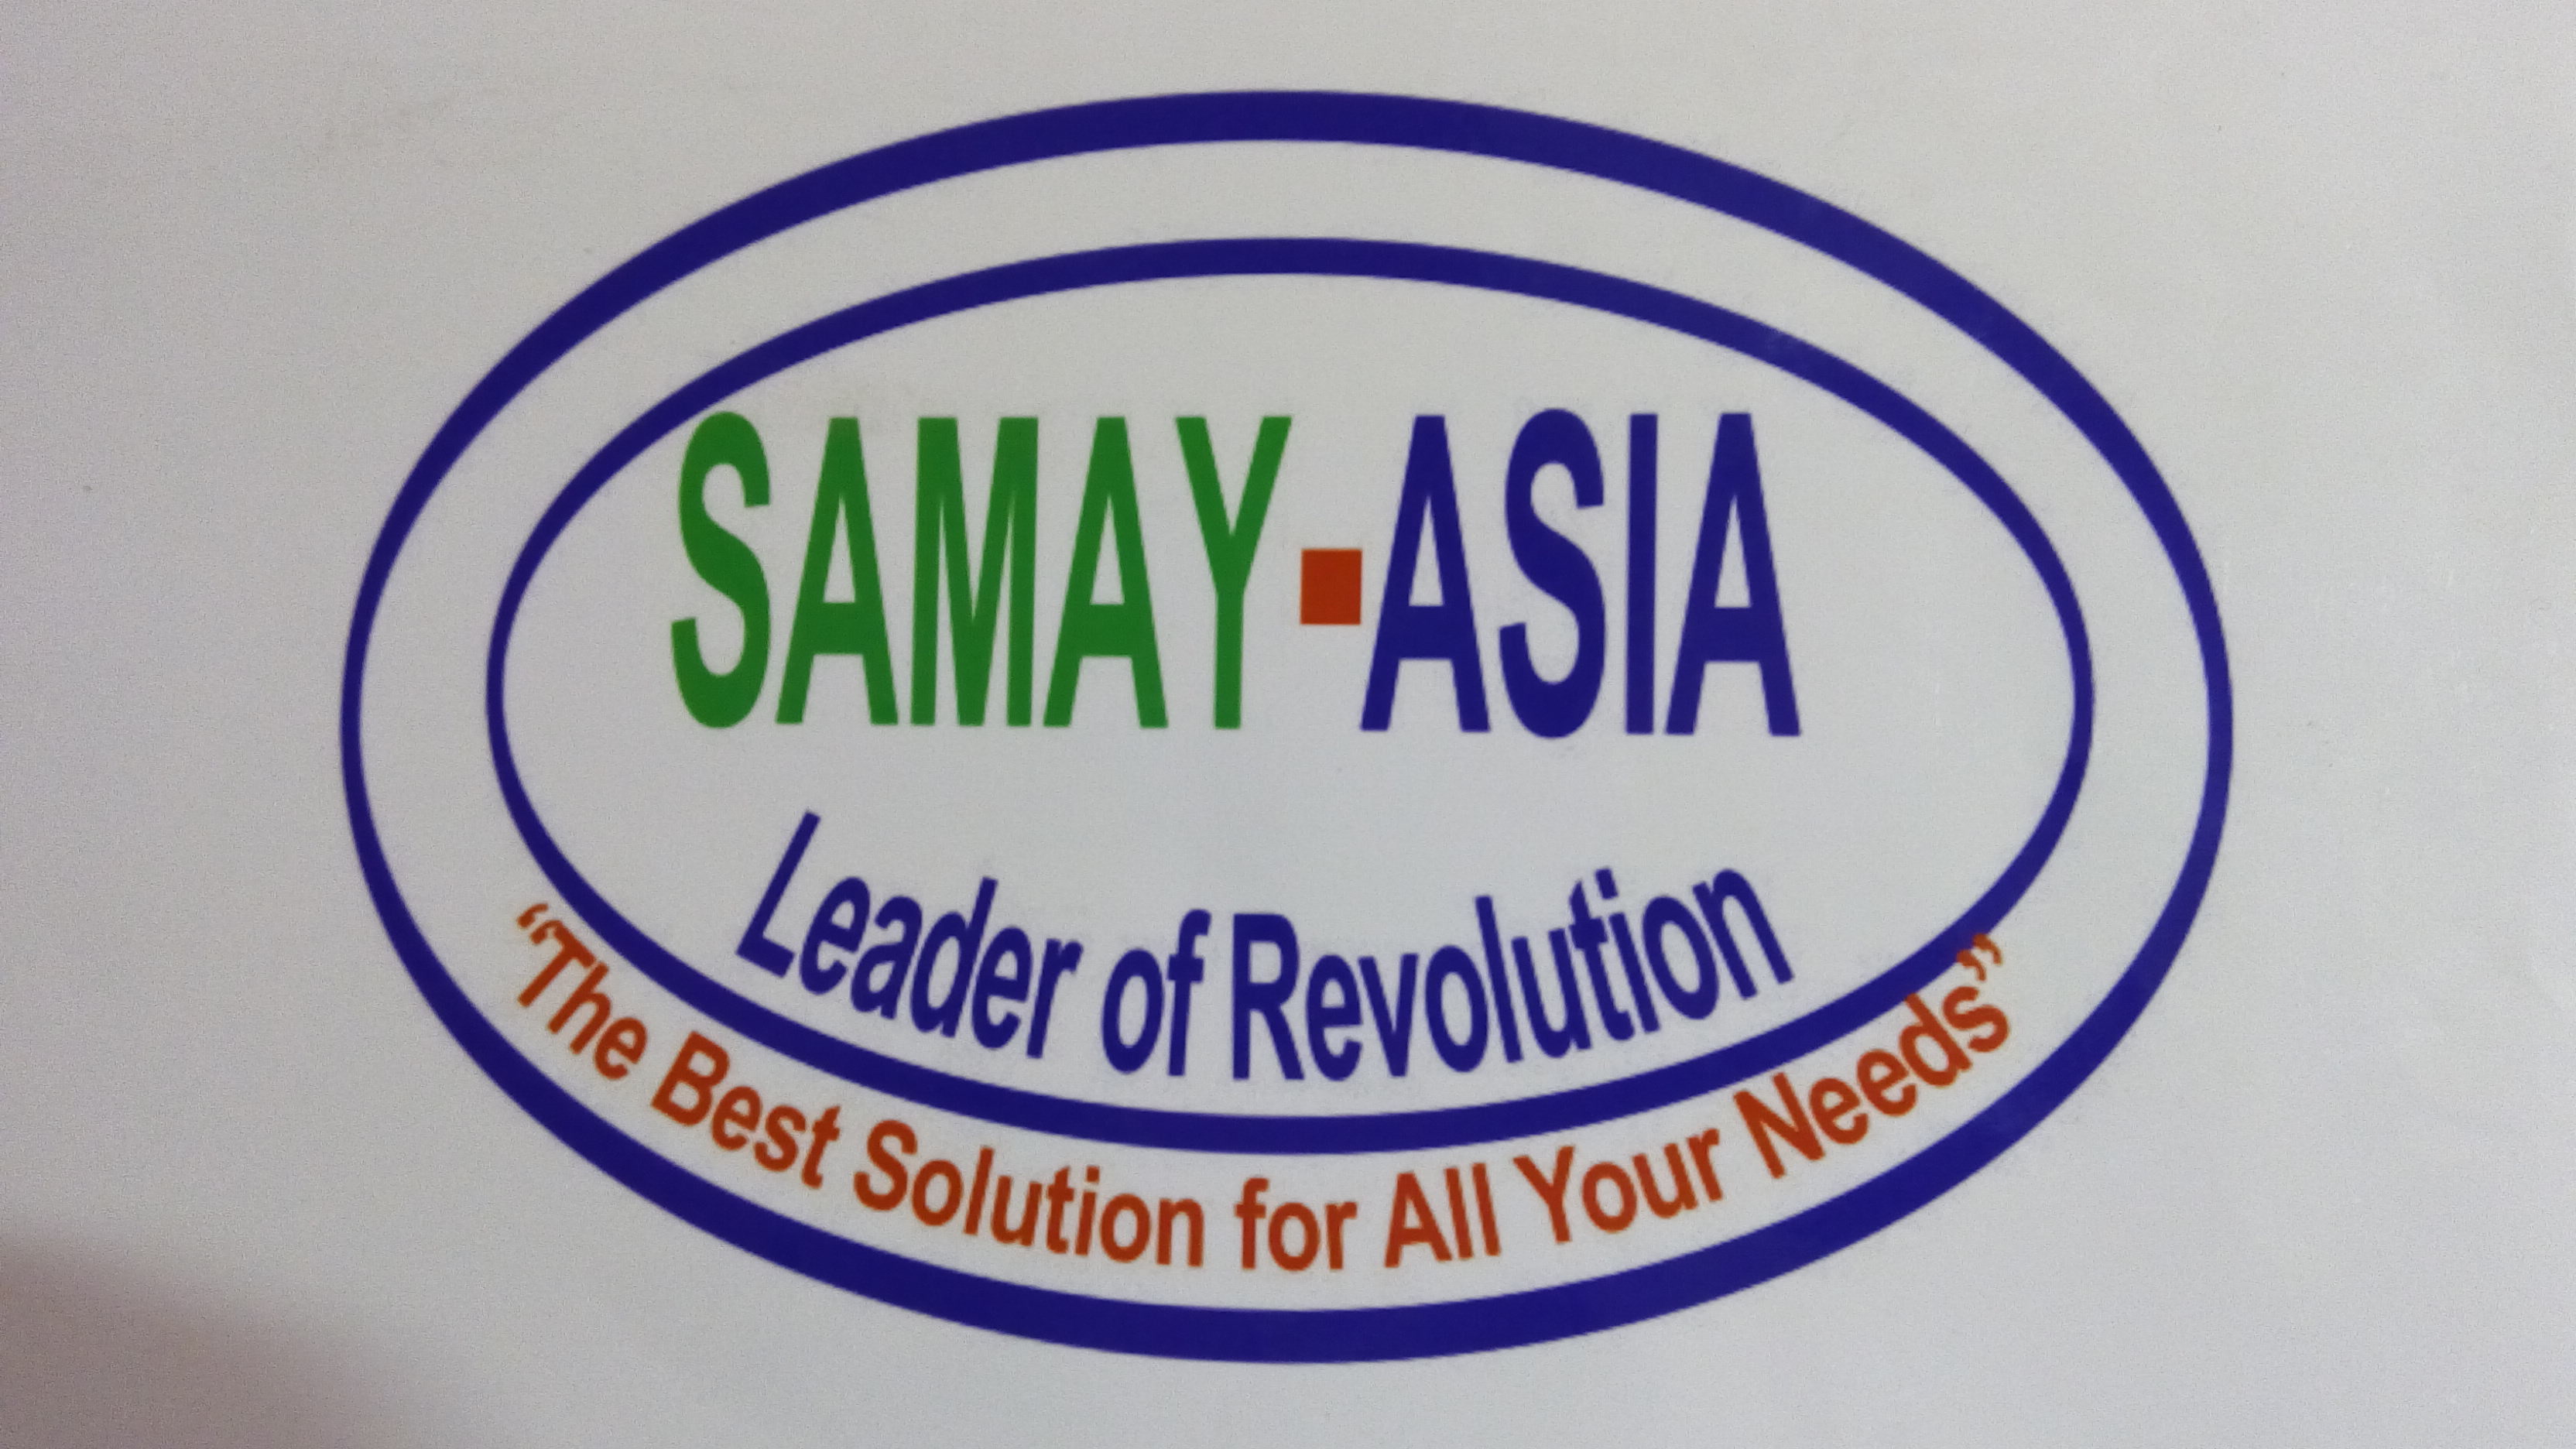 Samay Asia Pressfeeds & Coil AutoMation Company